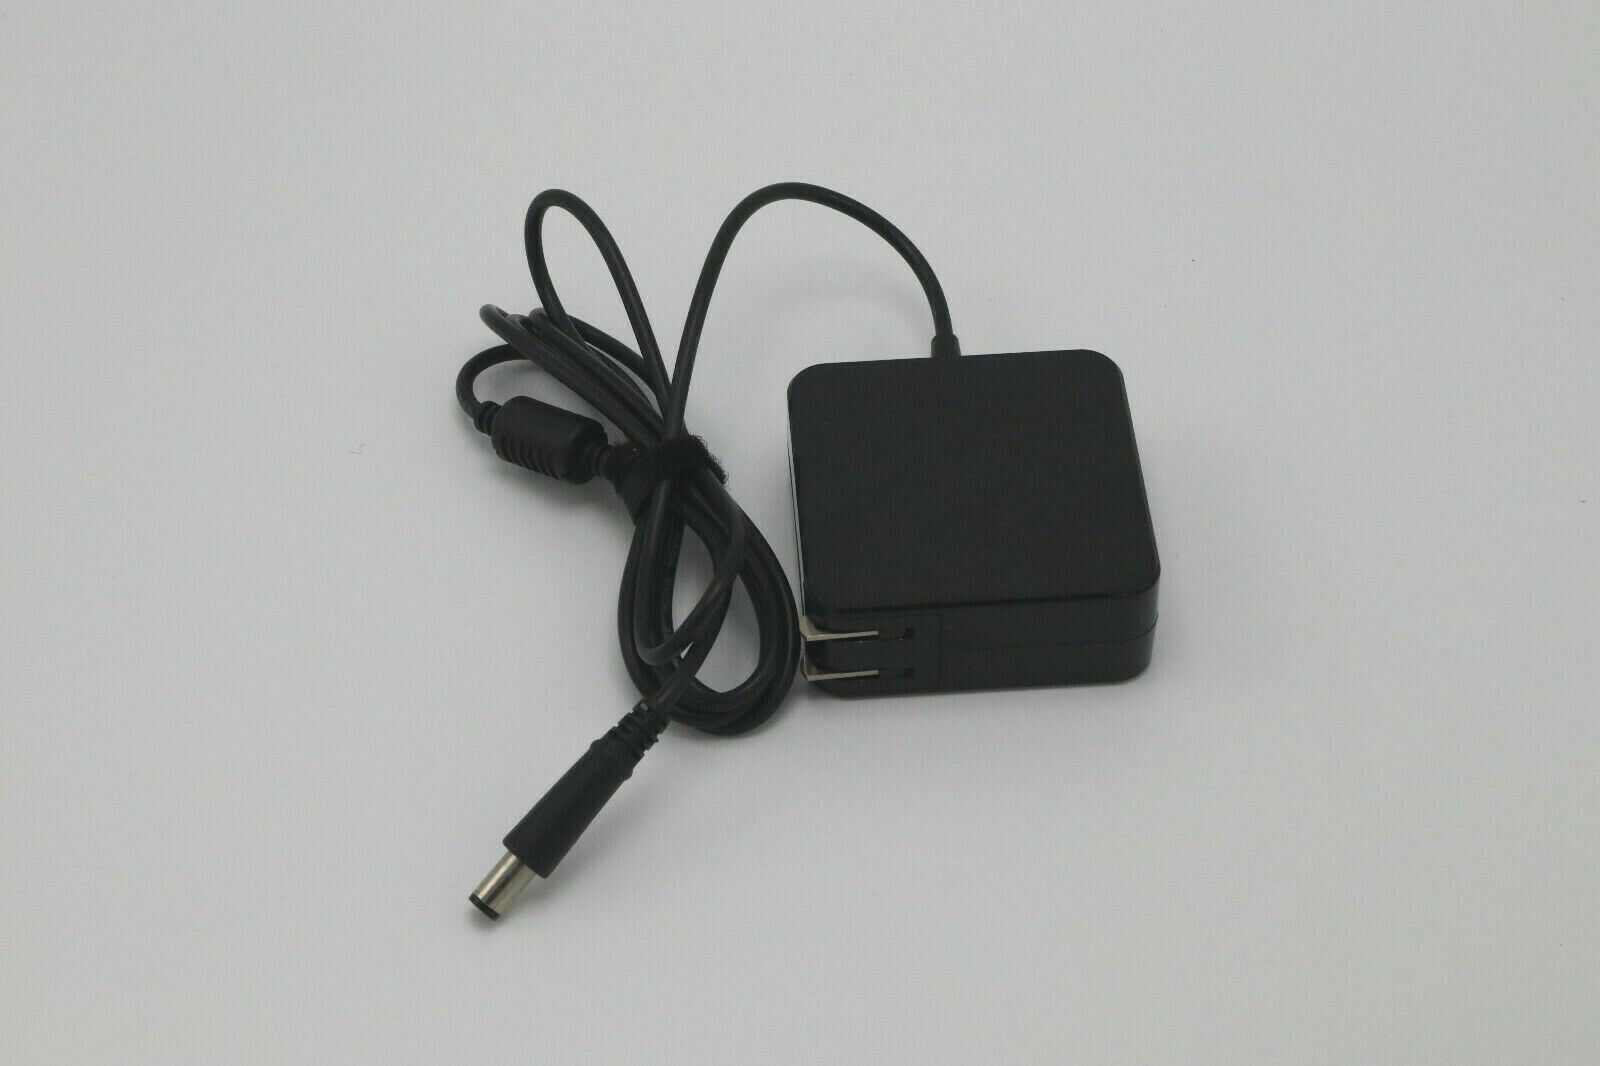 SIKER SWITCHING POWER ADAPTER SK90195334 for DELL LAPTOPS 19.5V 3.34A NEW WO BOX